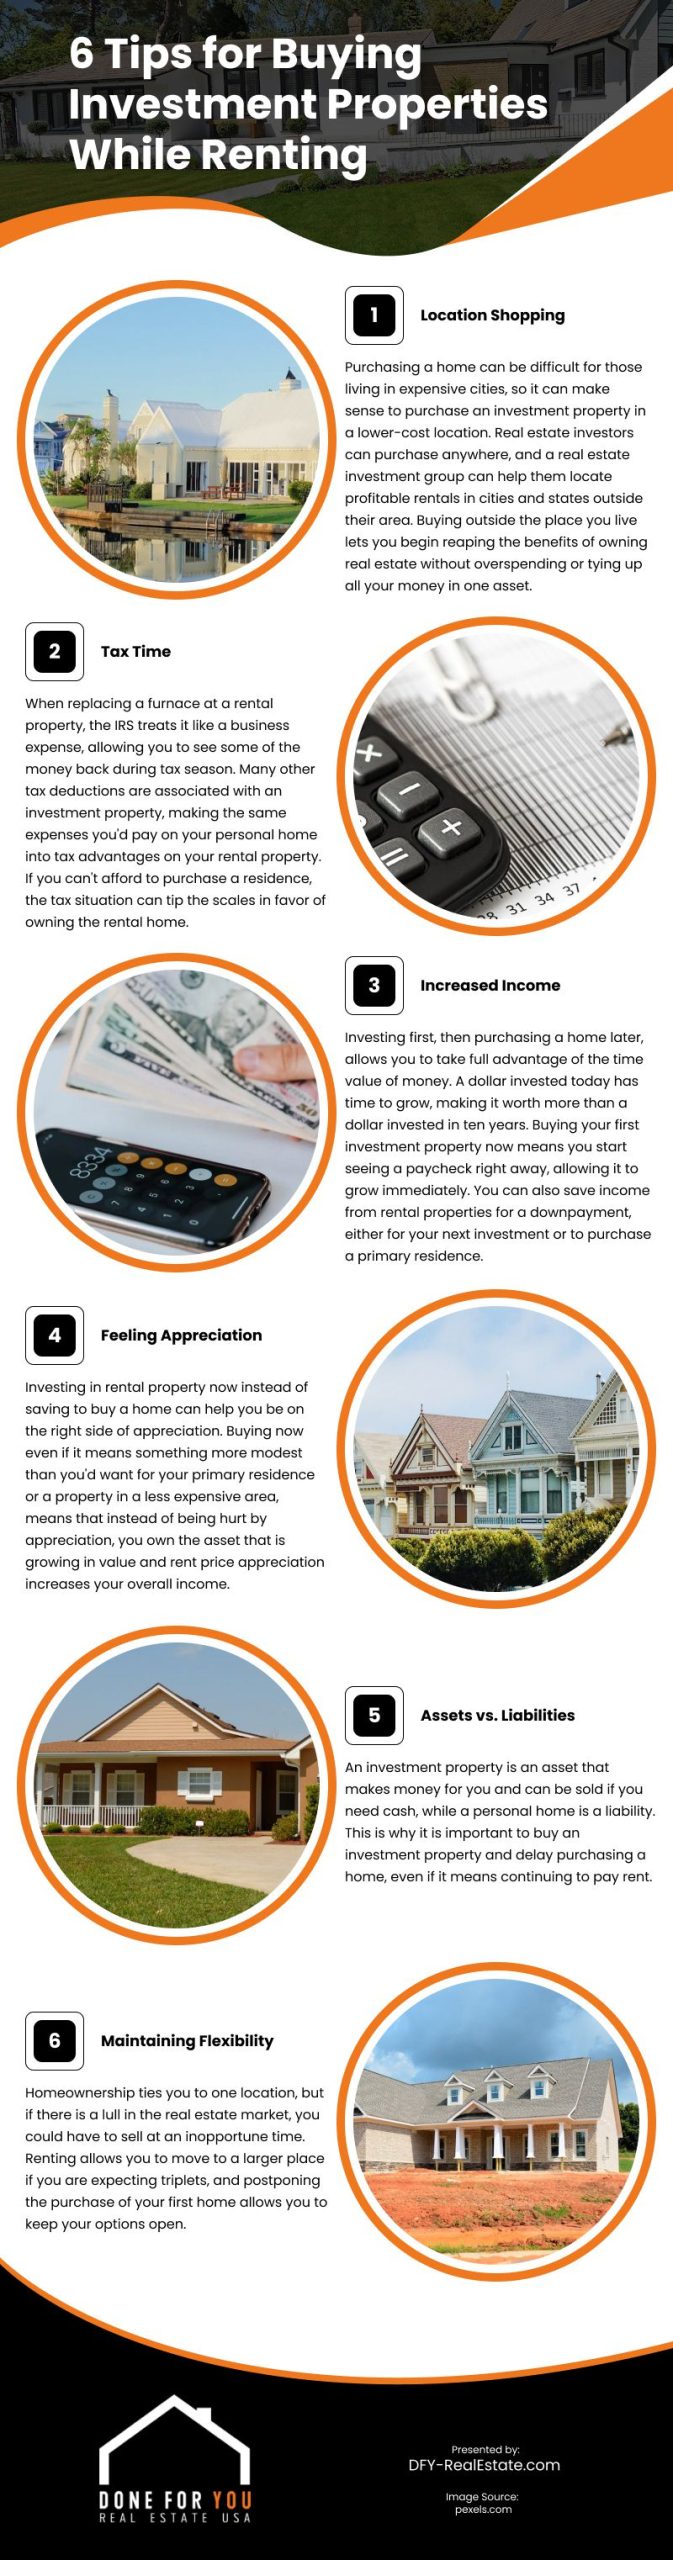 6 Tips for Buying Investment Properties While Renting Infographic